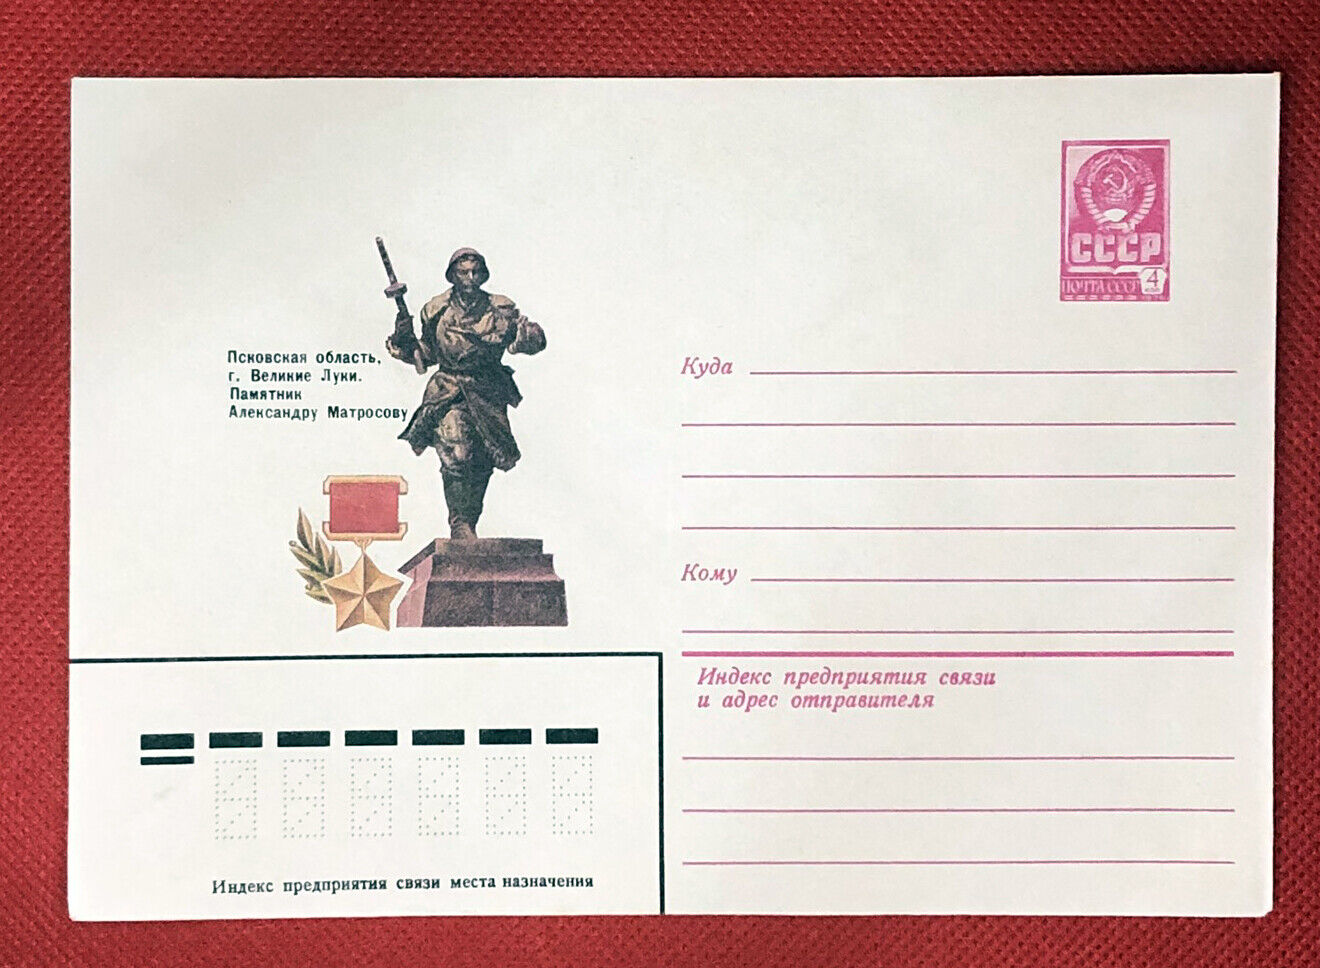 Russia - mint entire - postal stationery - Military / Statue